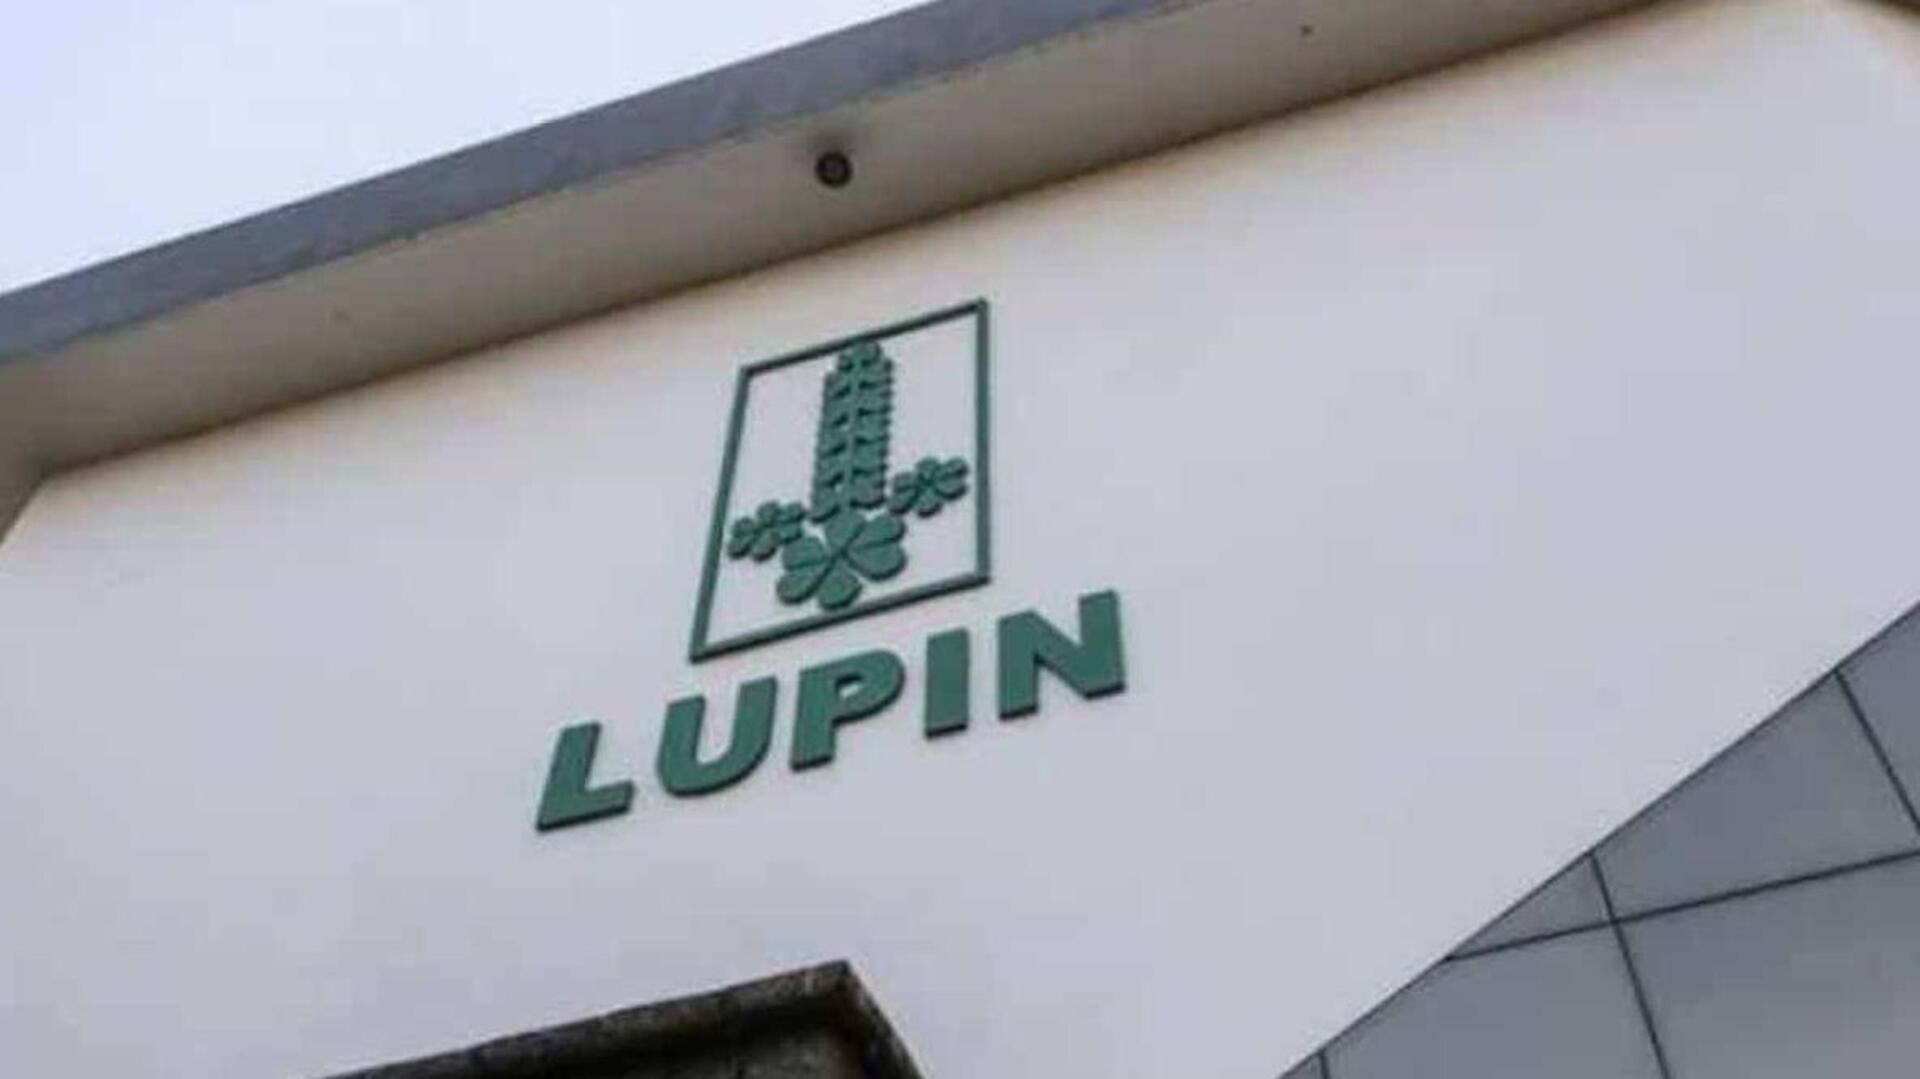 Lupin's shares reach 52-week high following impressive Q2 earnings